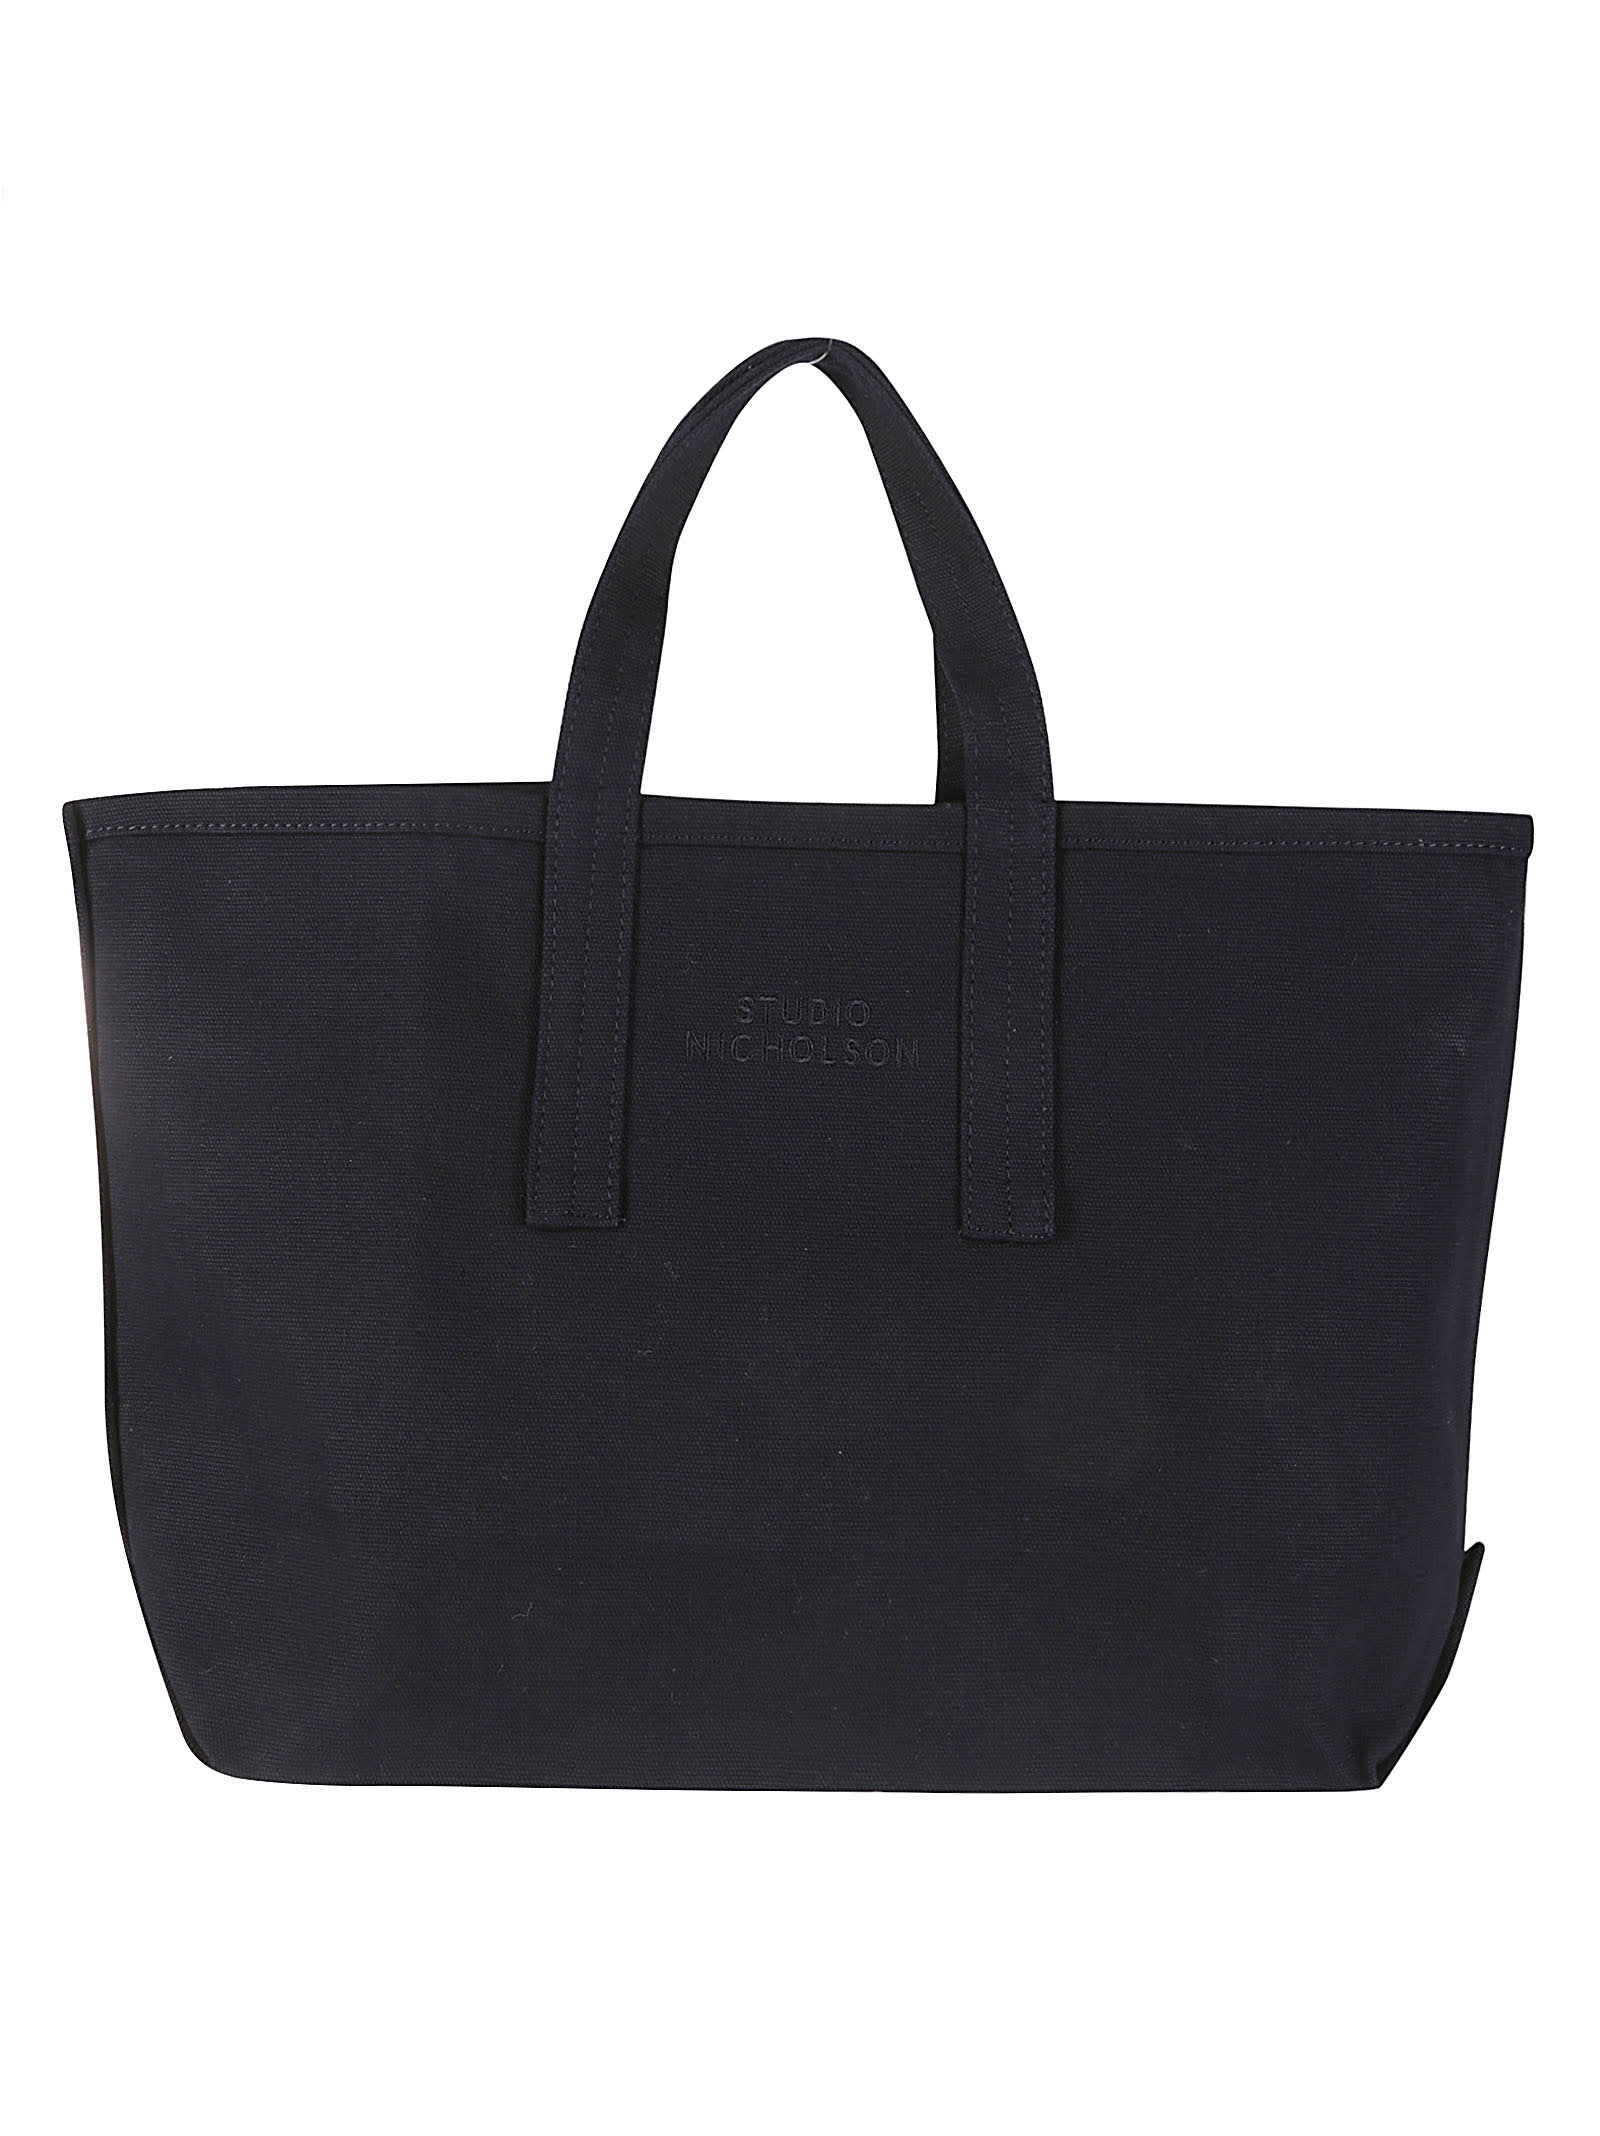 Accessories - Embroidered Logo Tote Bag